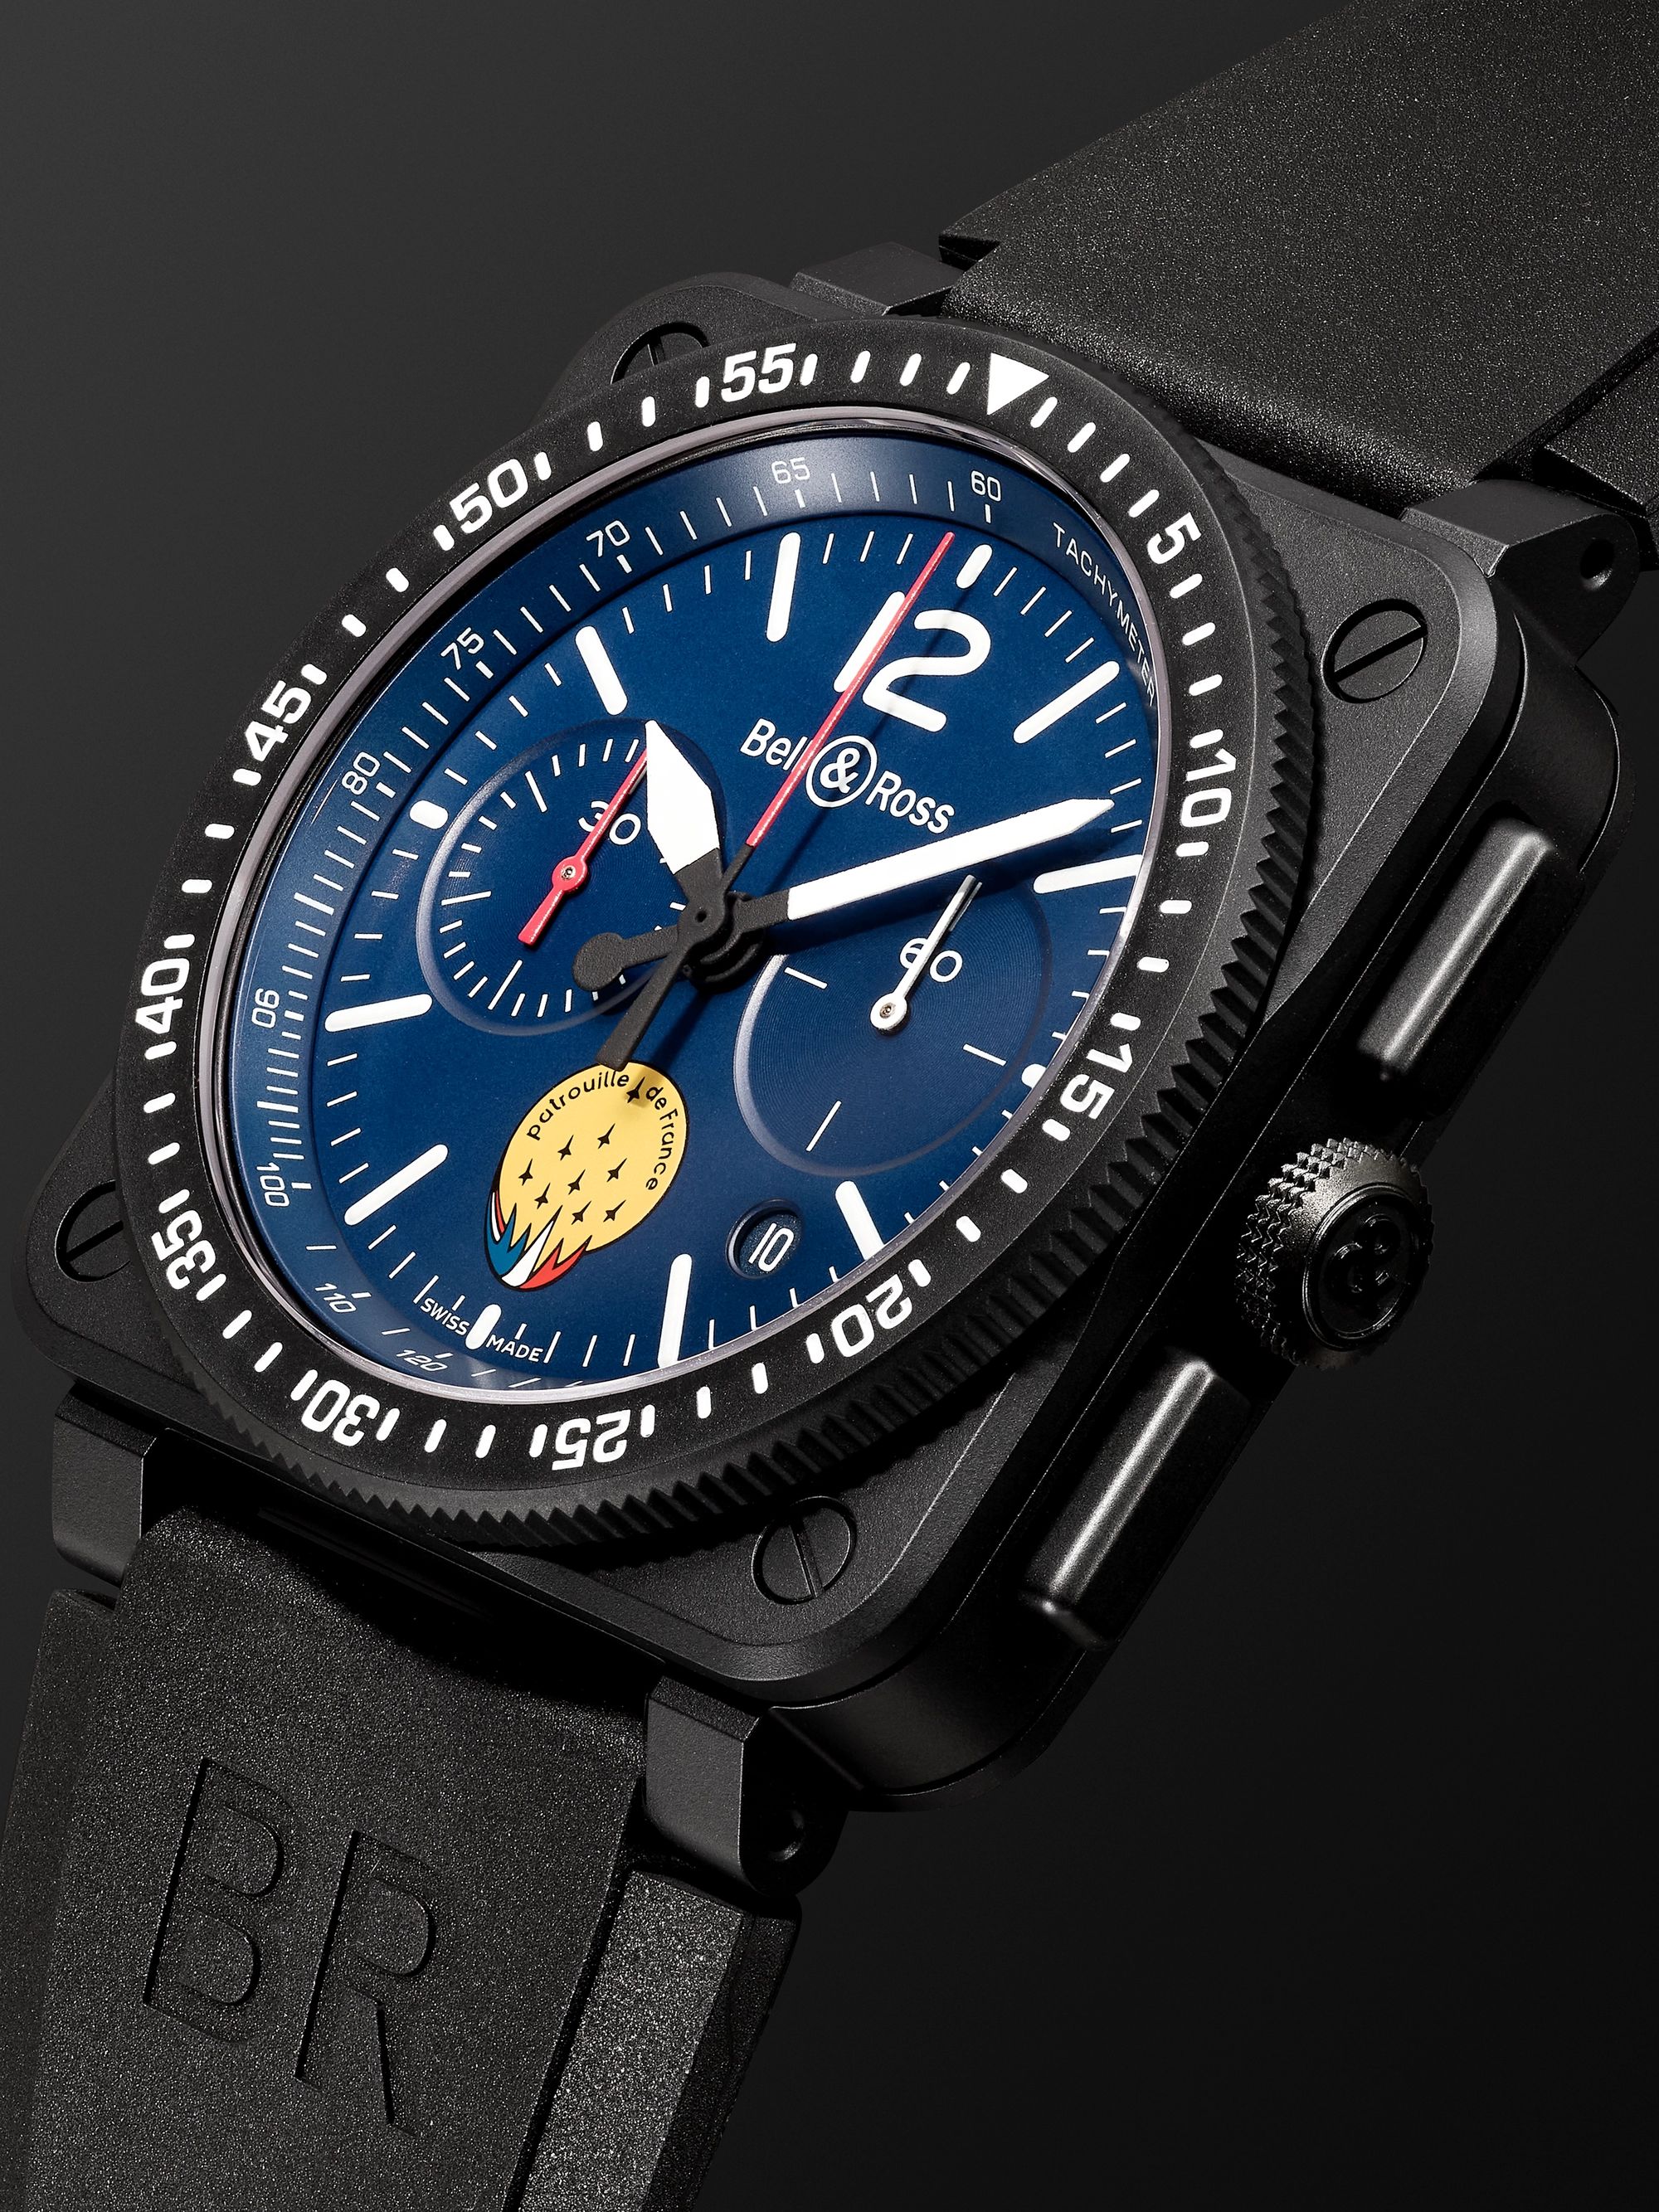 BELL & ROSS BR 03-94 PA94 Patrouille de France Limited Edition Chronograph Ceramic and Rubber Watch, Ref. No. BR0394-PAF1-CE/SRB